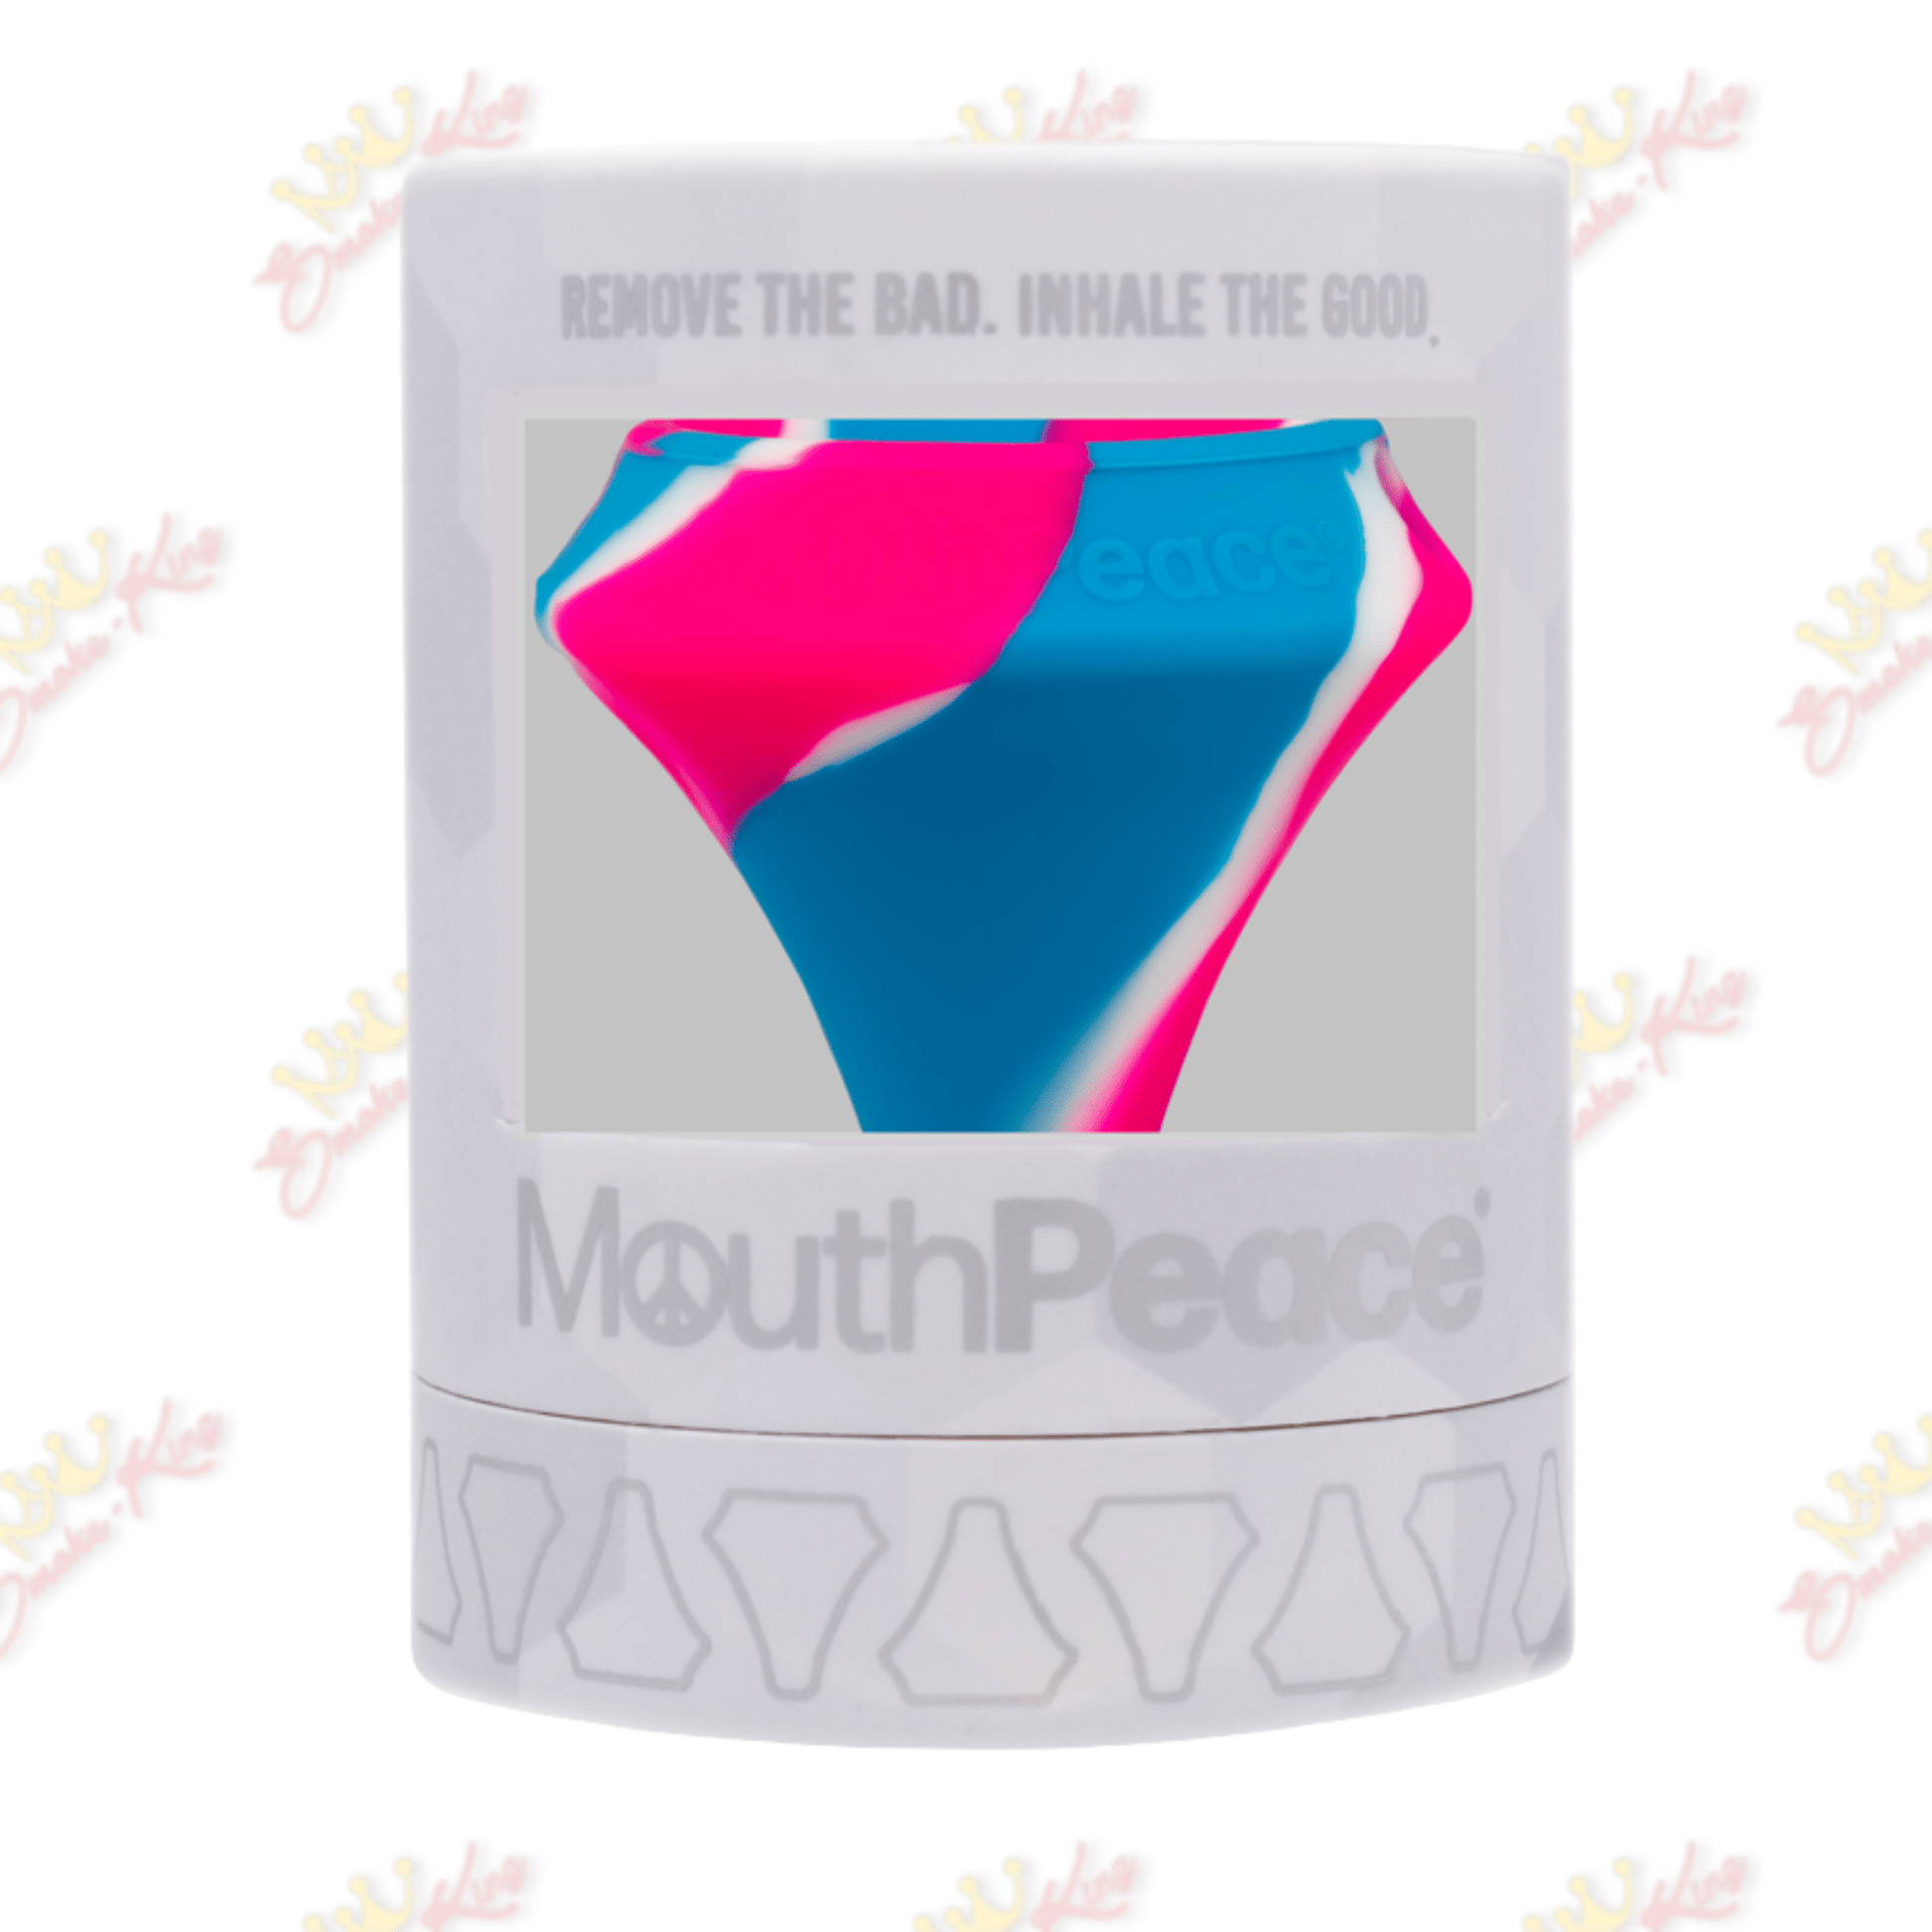 Moose Labs Unicorn Bong Filter Mouth Piece